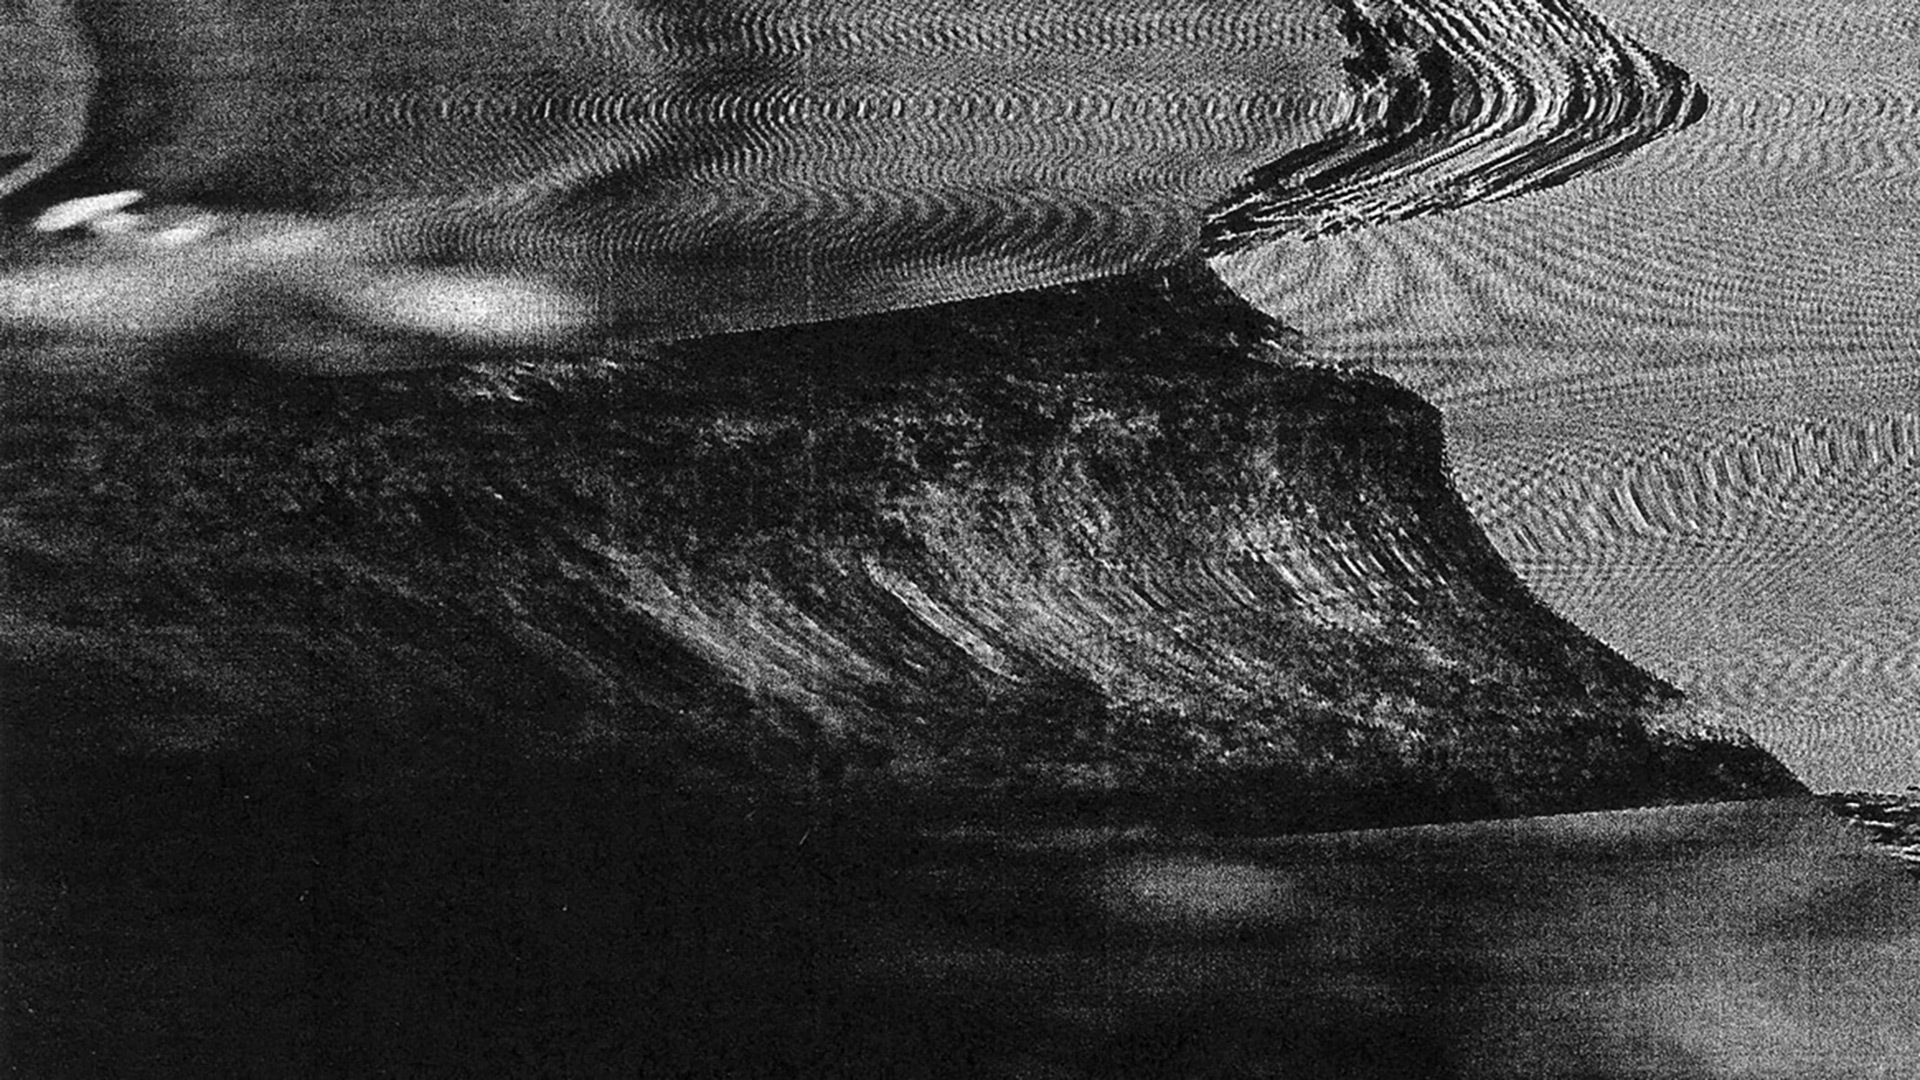 Monochrome scanograph or xerox art composition depicting a distorted and warped representation of nature.